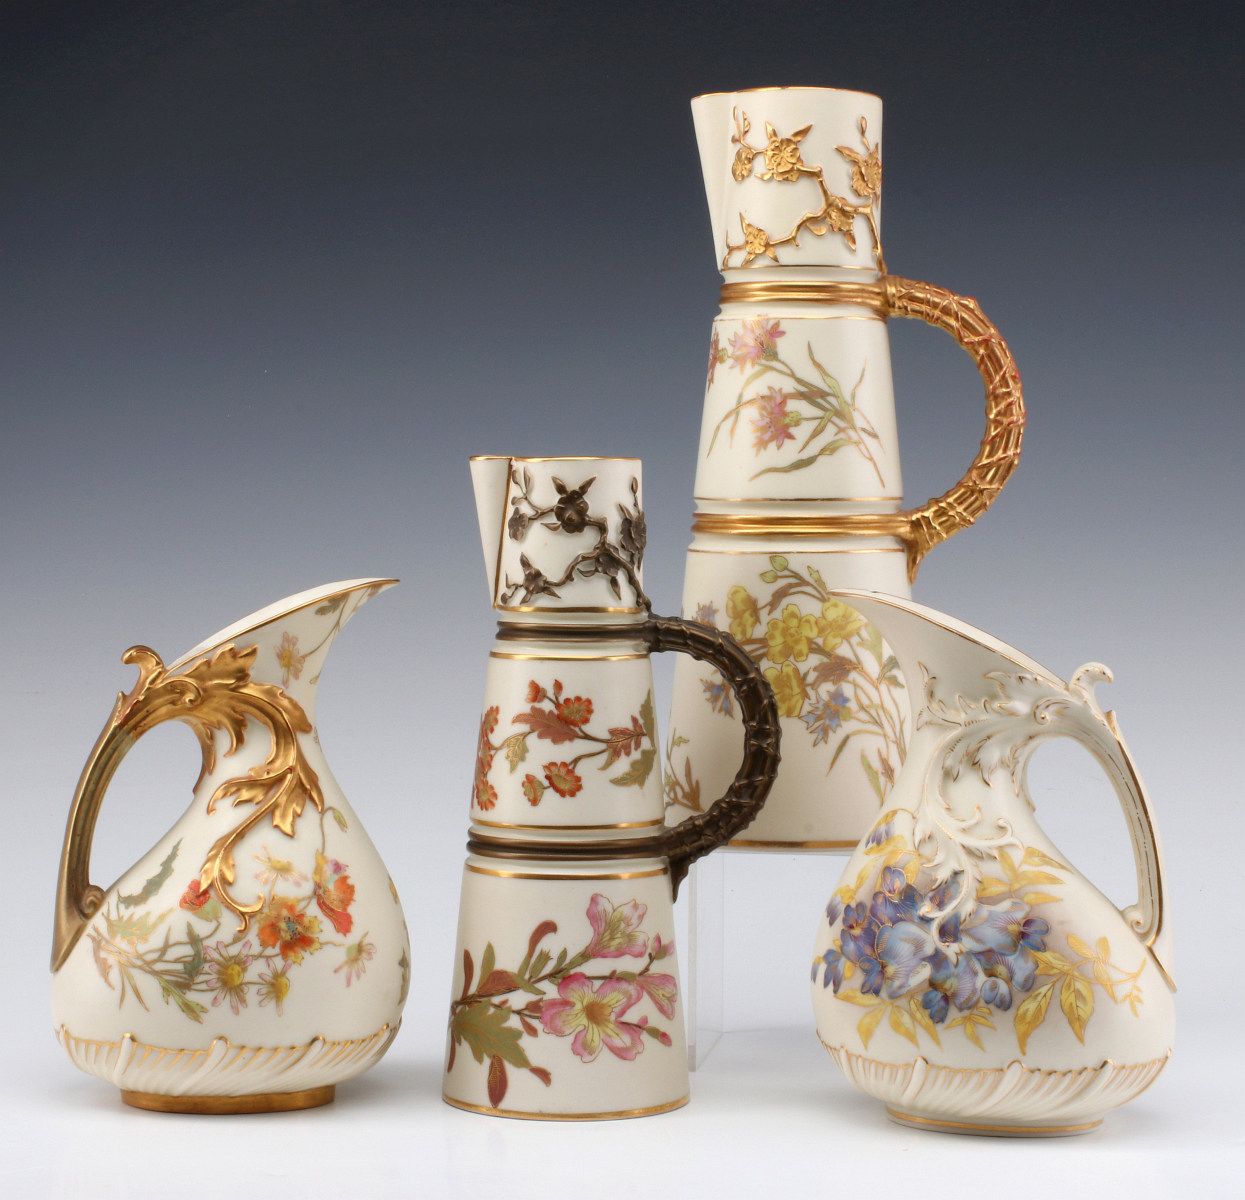 FOUR 19TH C. ARTIST SIGNED ROYAL WORCESTER PITCHERS